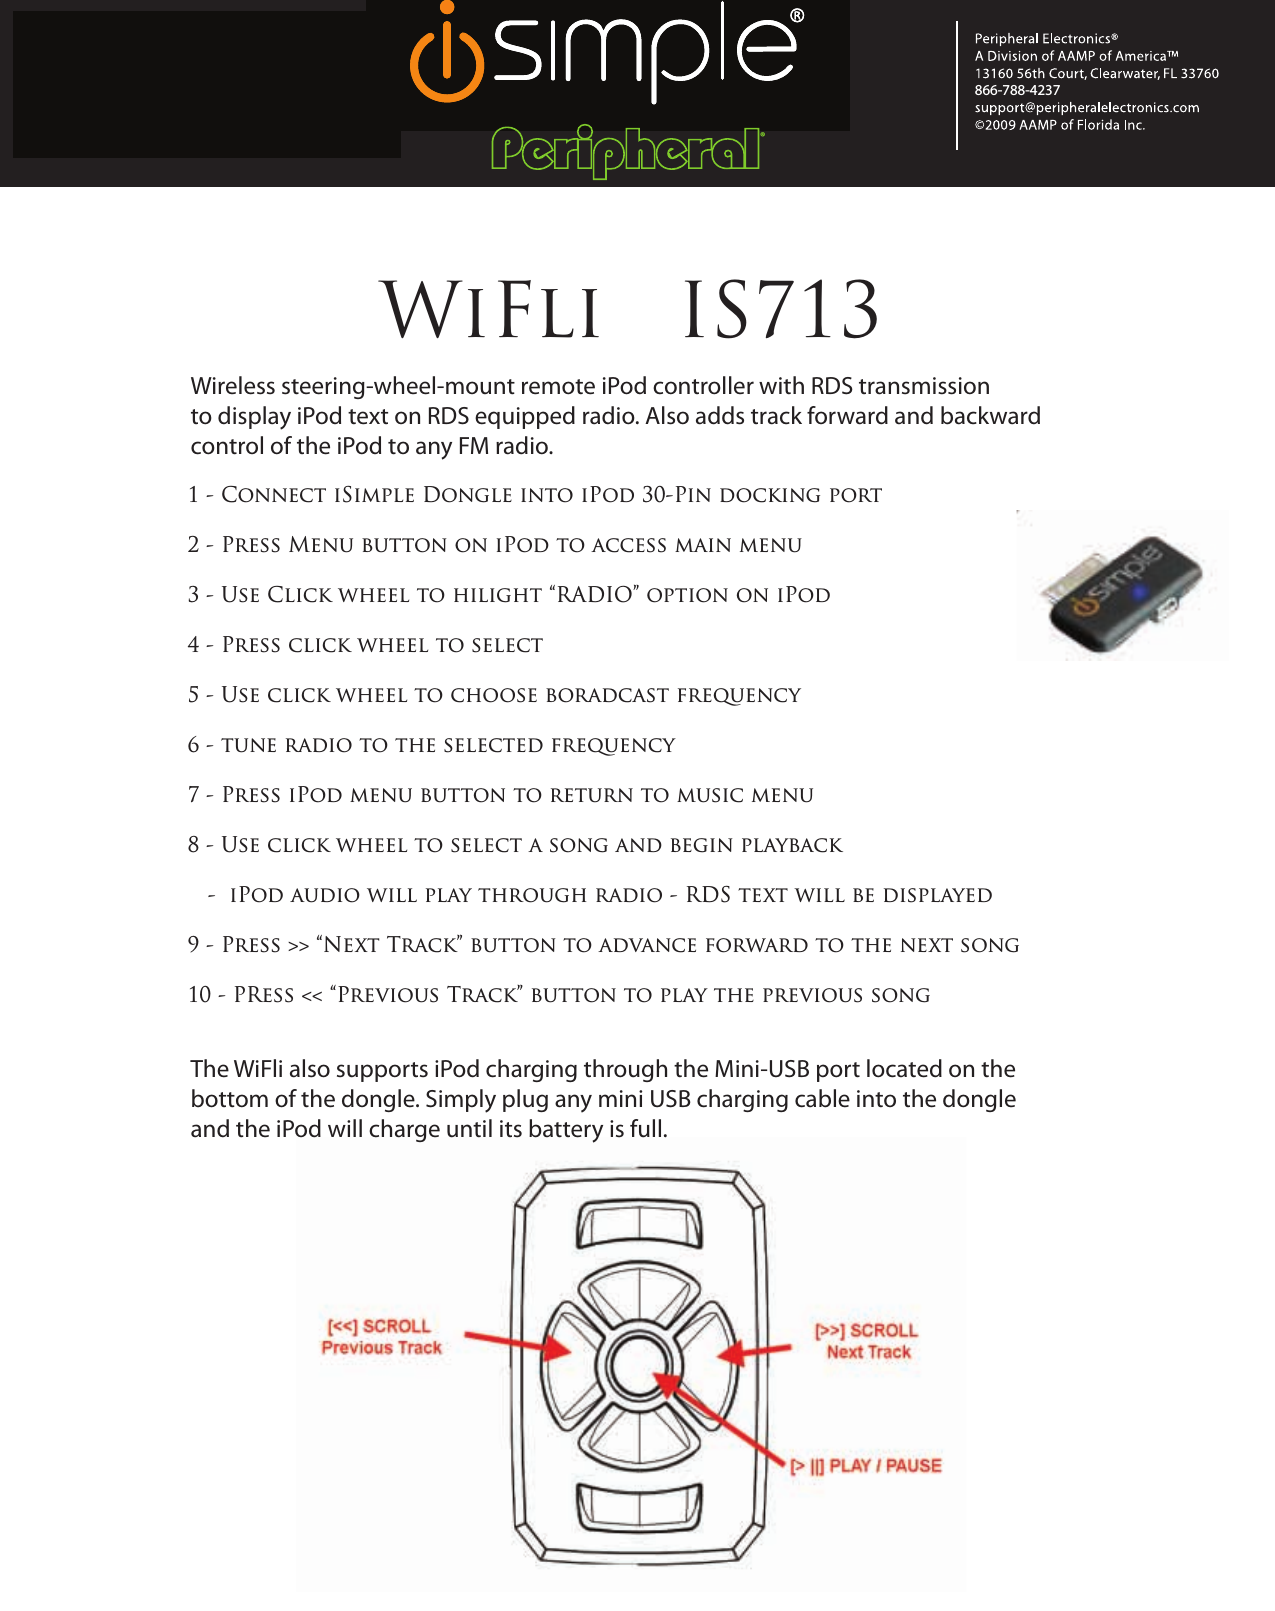 PRODUCT DEVELOPMENT(New Product Introduction)®866-788-4237   WiFli   IS7131 - Connect iSimple Dongle into iPod 30-Pin docking port2 - Press Menu button on iPod to access main menu3 - Use Click wheel to hilight “RADIO” option on iPod4 - Press click wheel to select5 - Use click wheel to choose boradcast frequency6 - tune radio to the selected frequency7 - Press iPod menu button to return to music menu8 - Use click wheel to select a song and begin playback   -  iPod audio will play through radio - RDS text will be displayed 9 - Press &gt;&gt; “Next Track” button to advance forward to the next song10 - PRess &lt;&lt; “Previous Track” button to play the previous songWireless steering-wheel-mount remote iPod controller with RDS transmission to display iPod text on RDS equipped radio. Also adds track forward and backward control of the iPod to any FM radio.The WiFli also supports iPod charging through the Mini-USB port located on thebottom of the dongle. Simply plug any mini USB charging cable into the dongle and the iPod will charge until its battery is full.